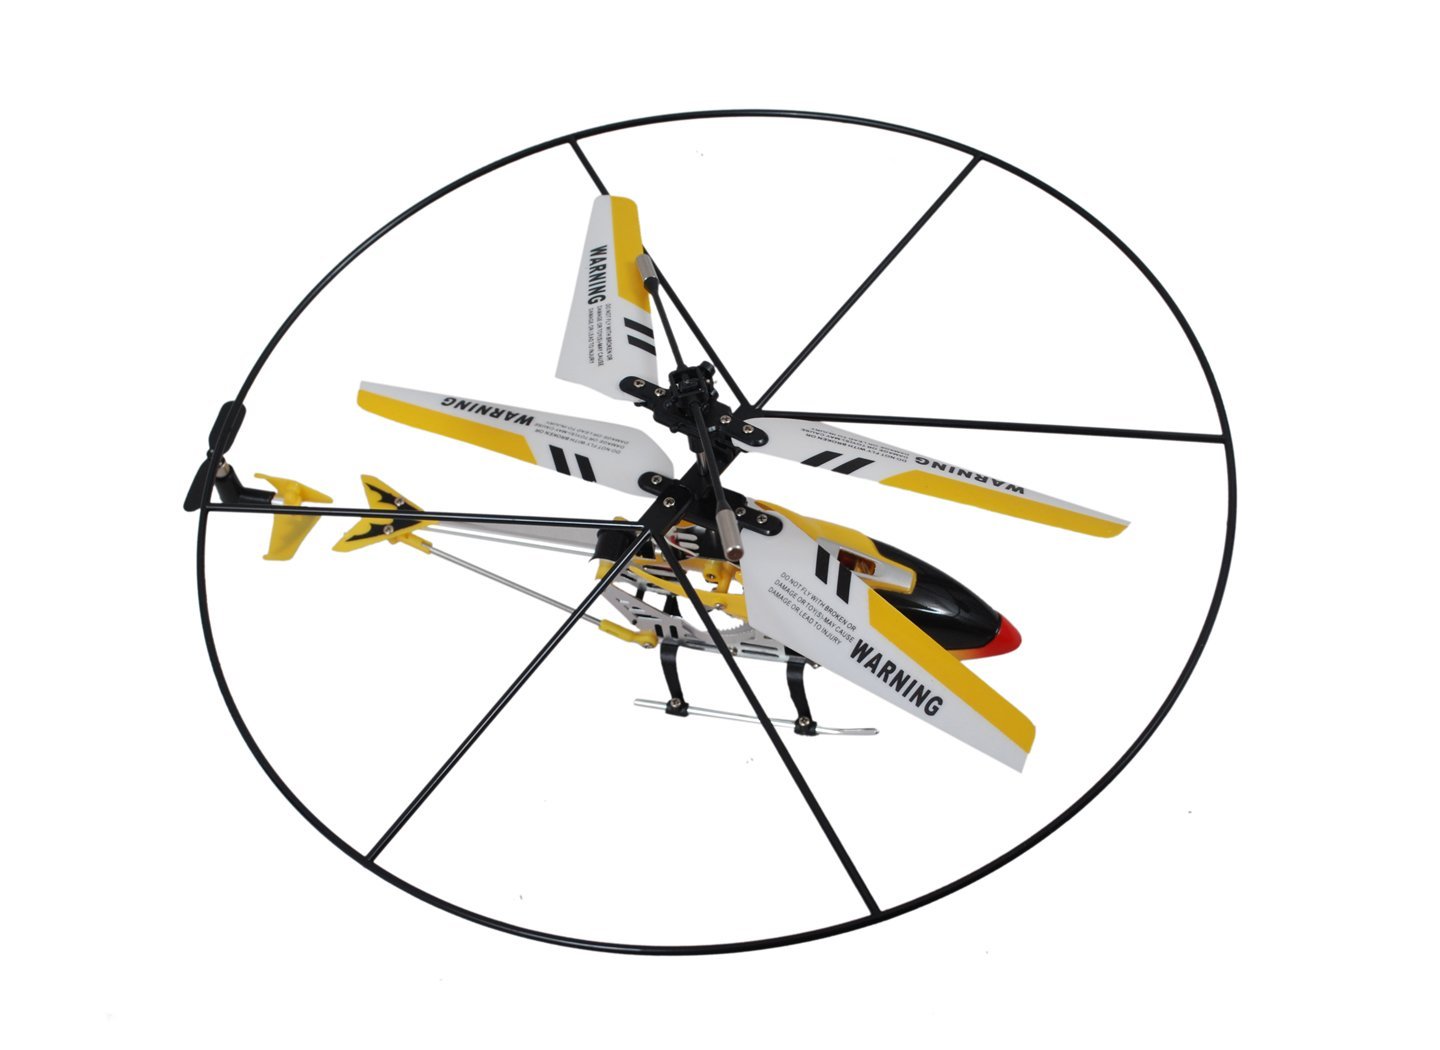 Multicolor 3.5 Channel Colourful Helicopter With Gyro